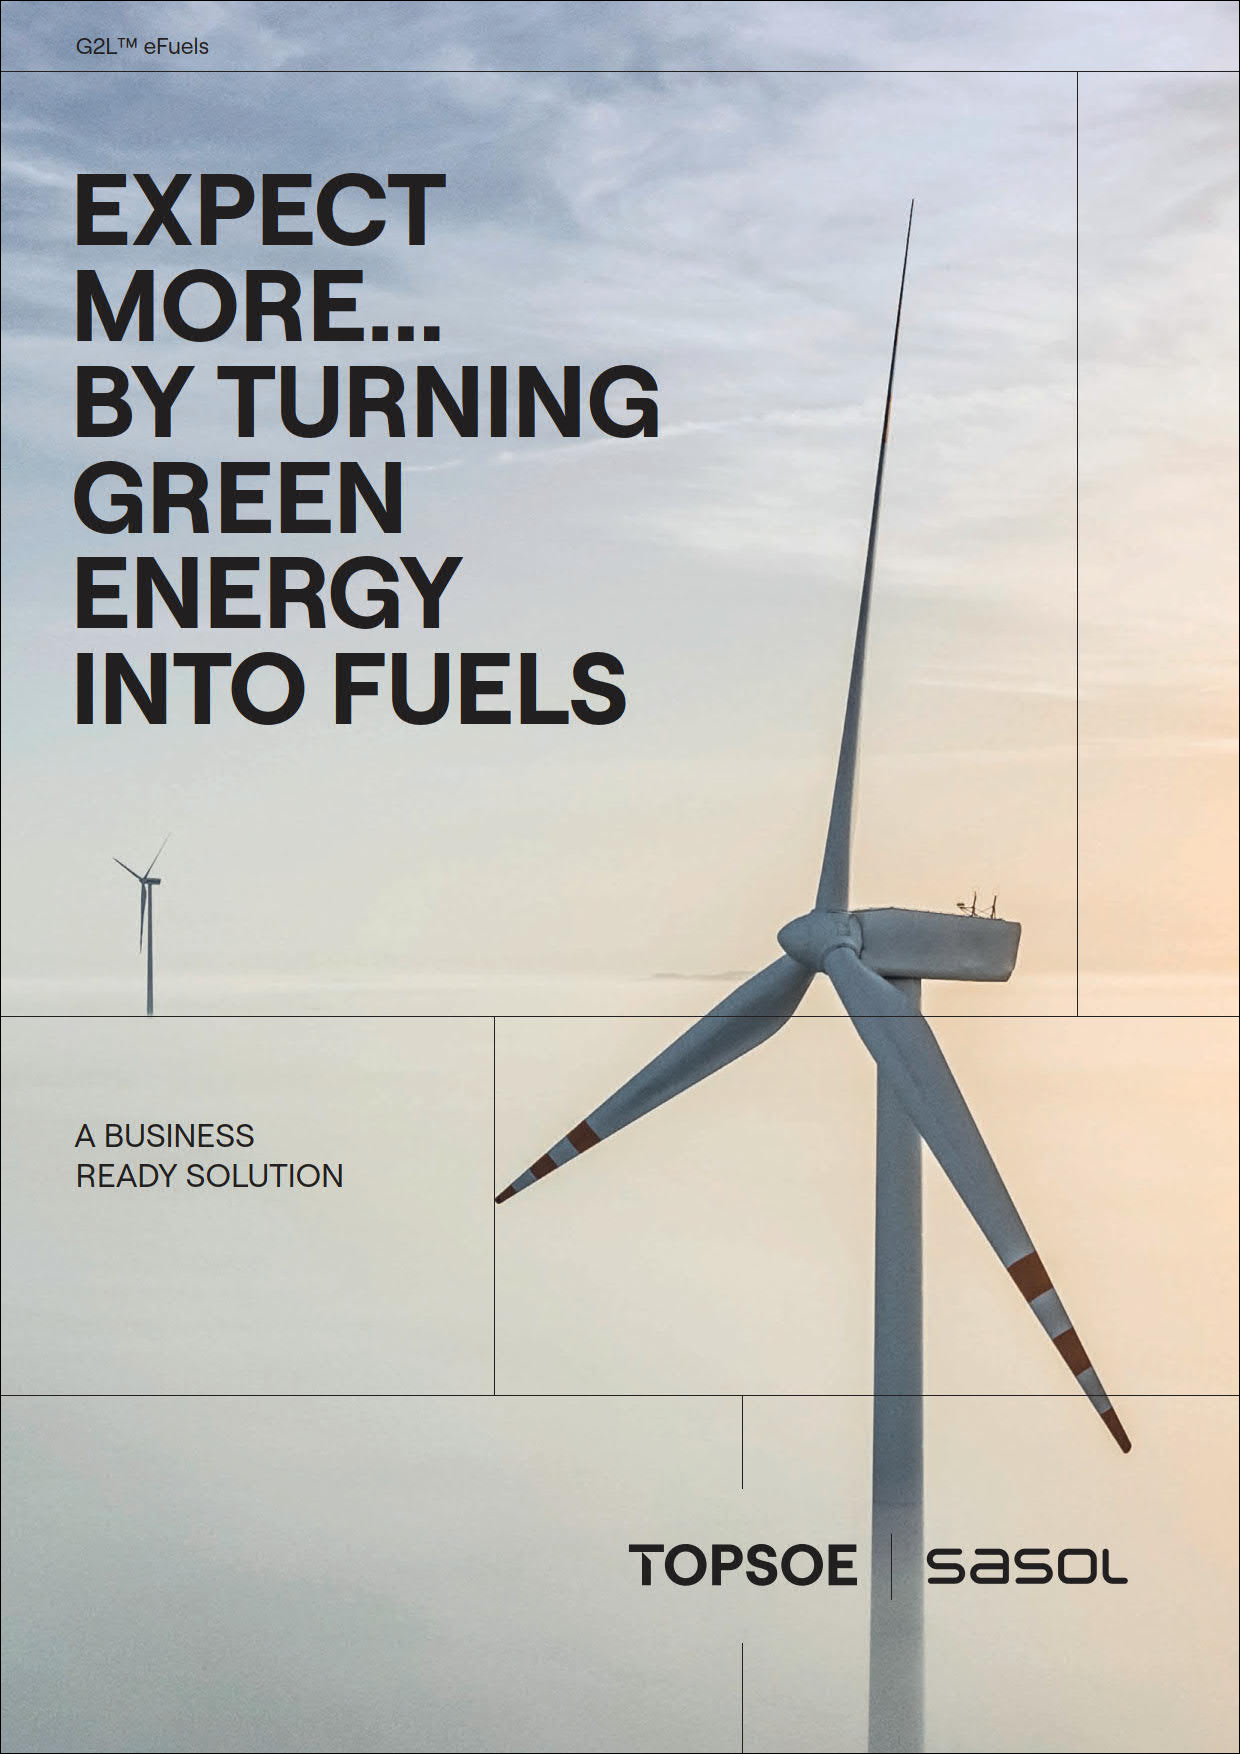 Expect more...by turning green energy into fuels with G2L™